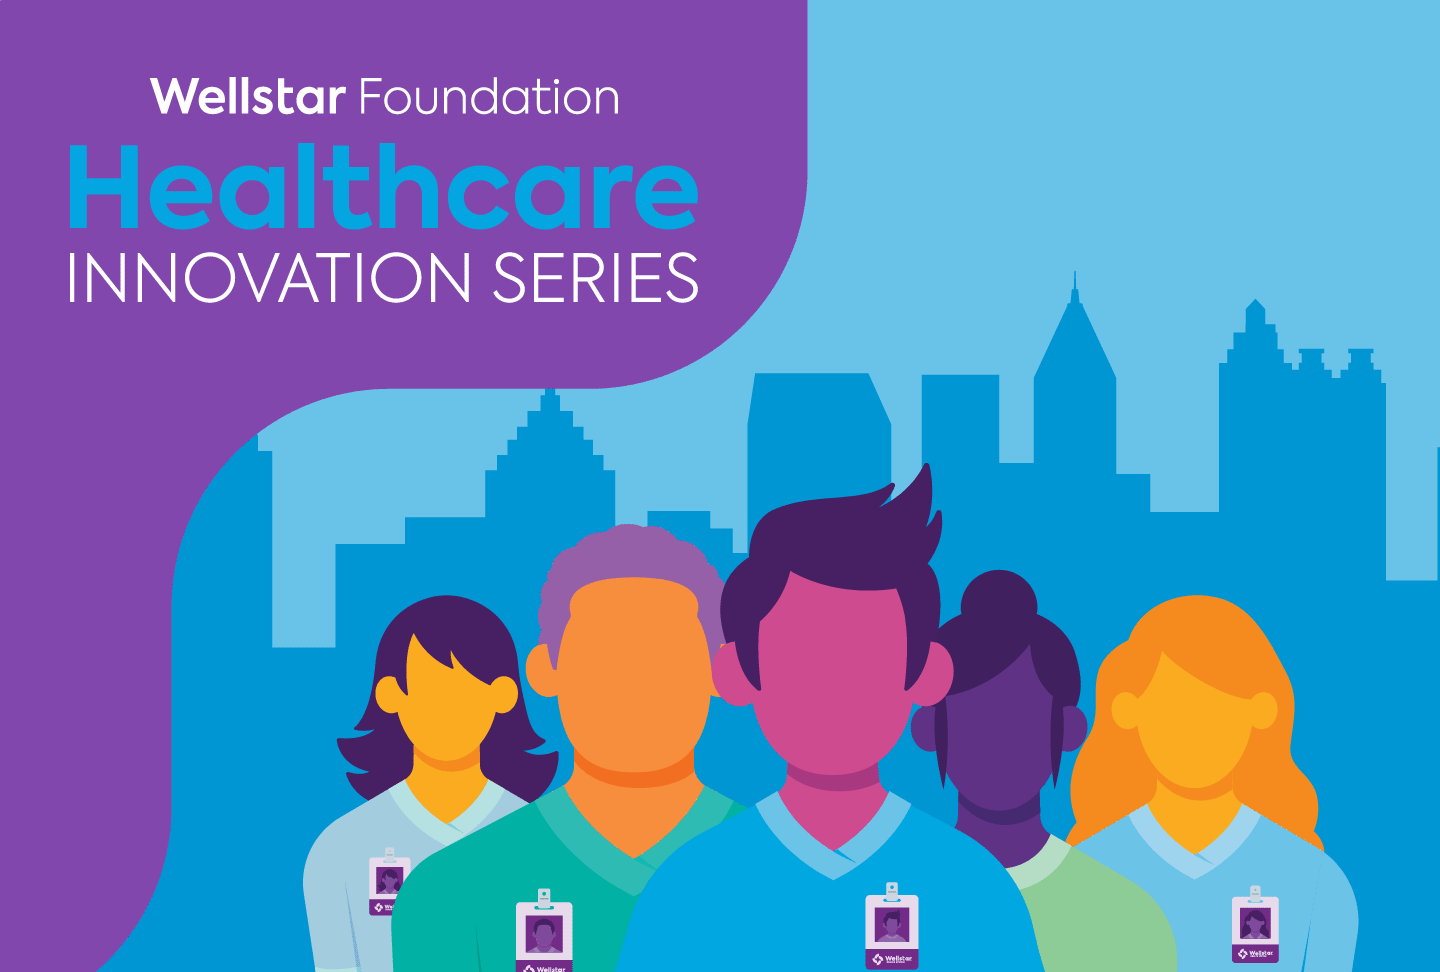 Illustration of people, text reads "Wellstar Foundation Healthcare Innovation Series"